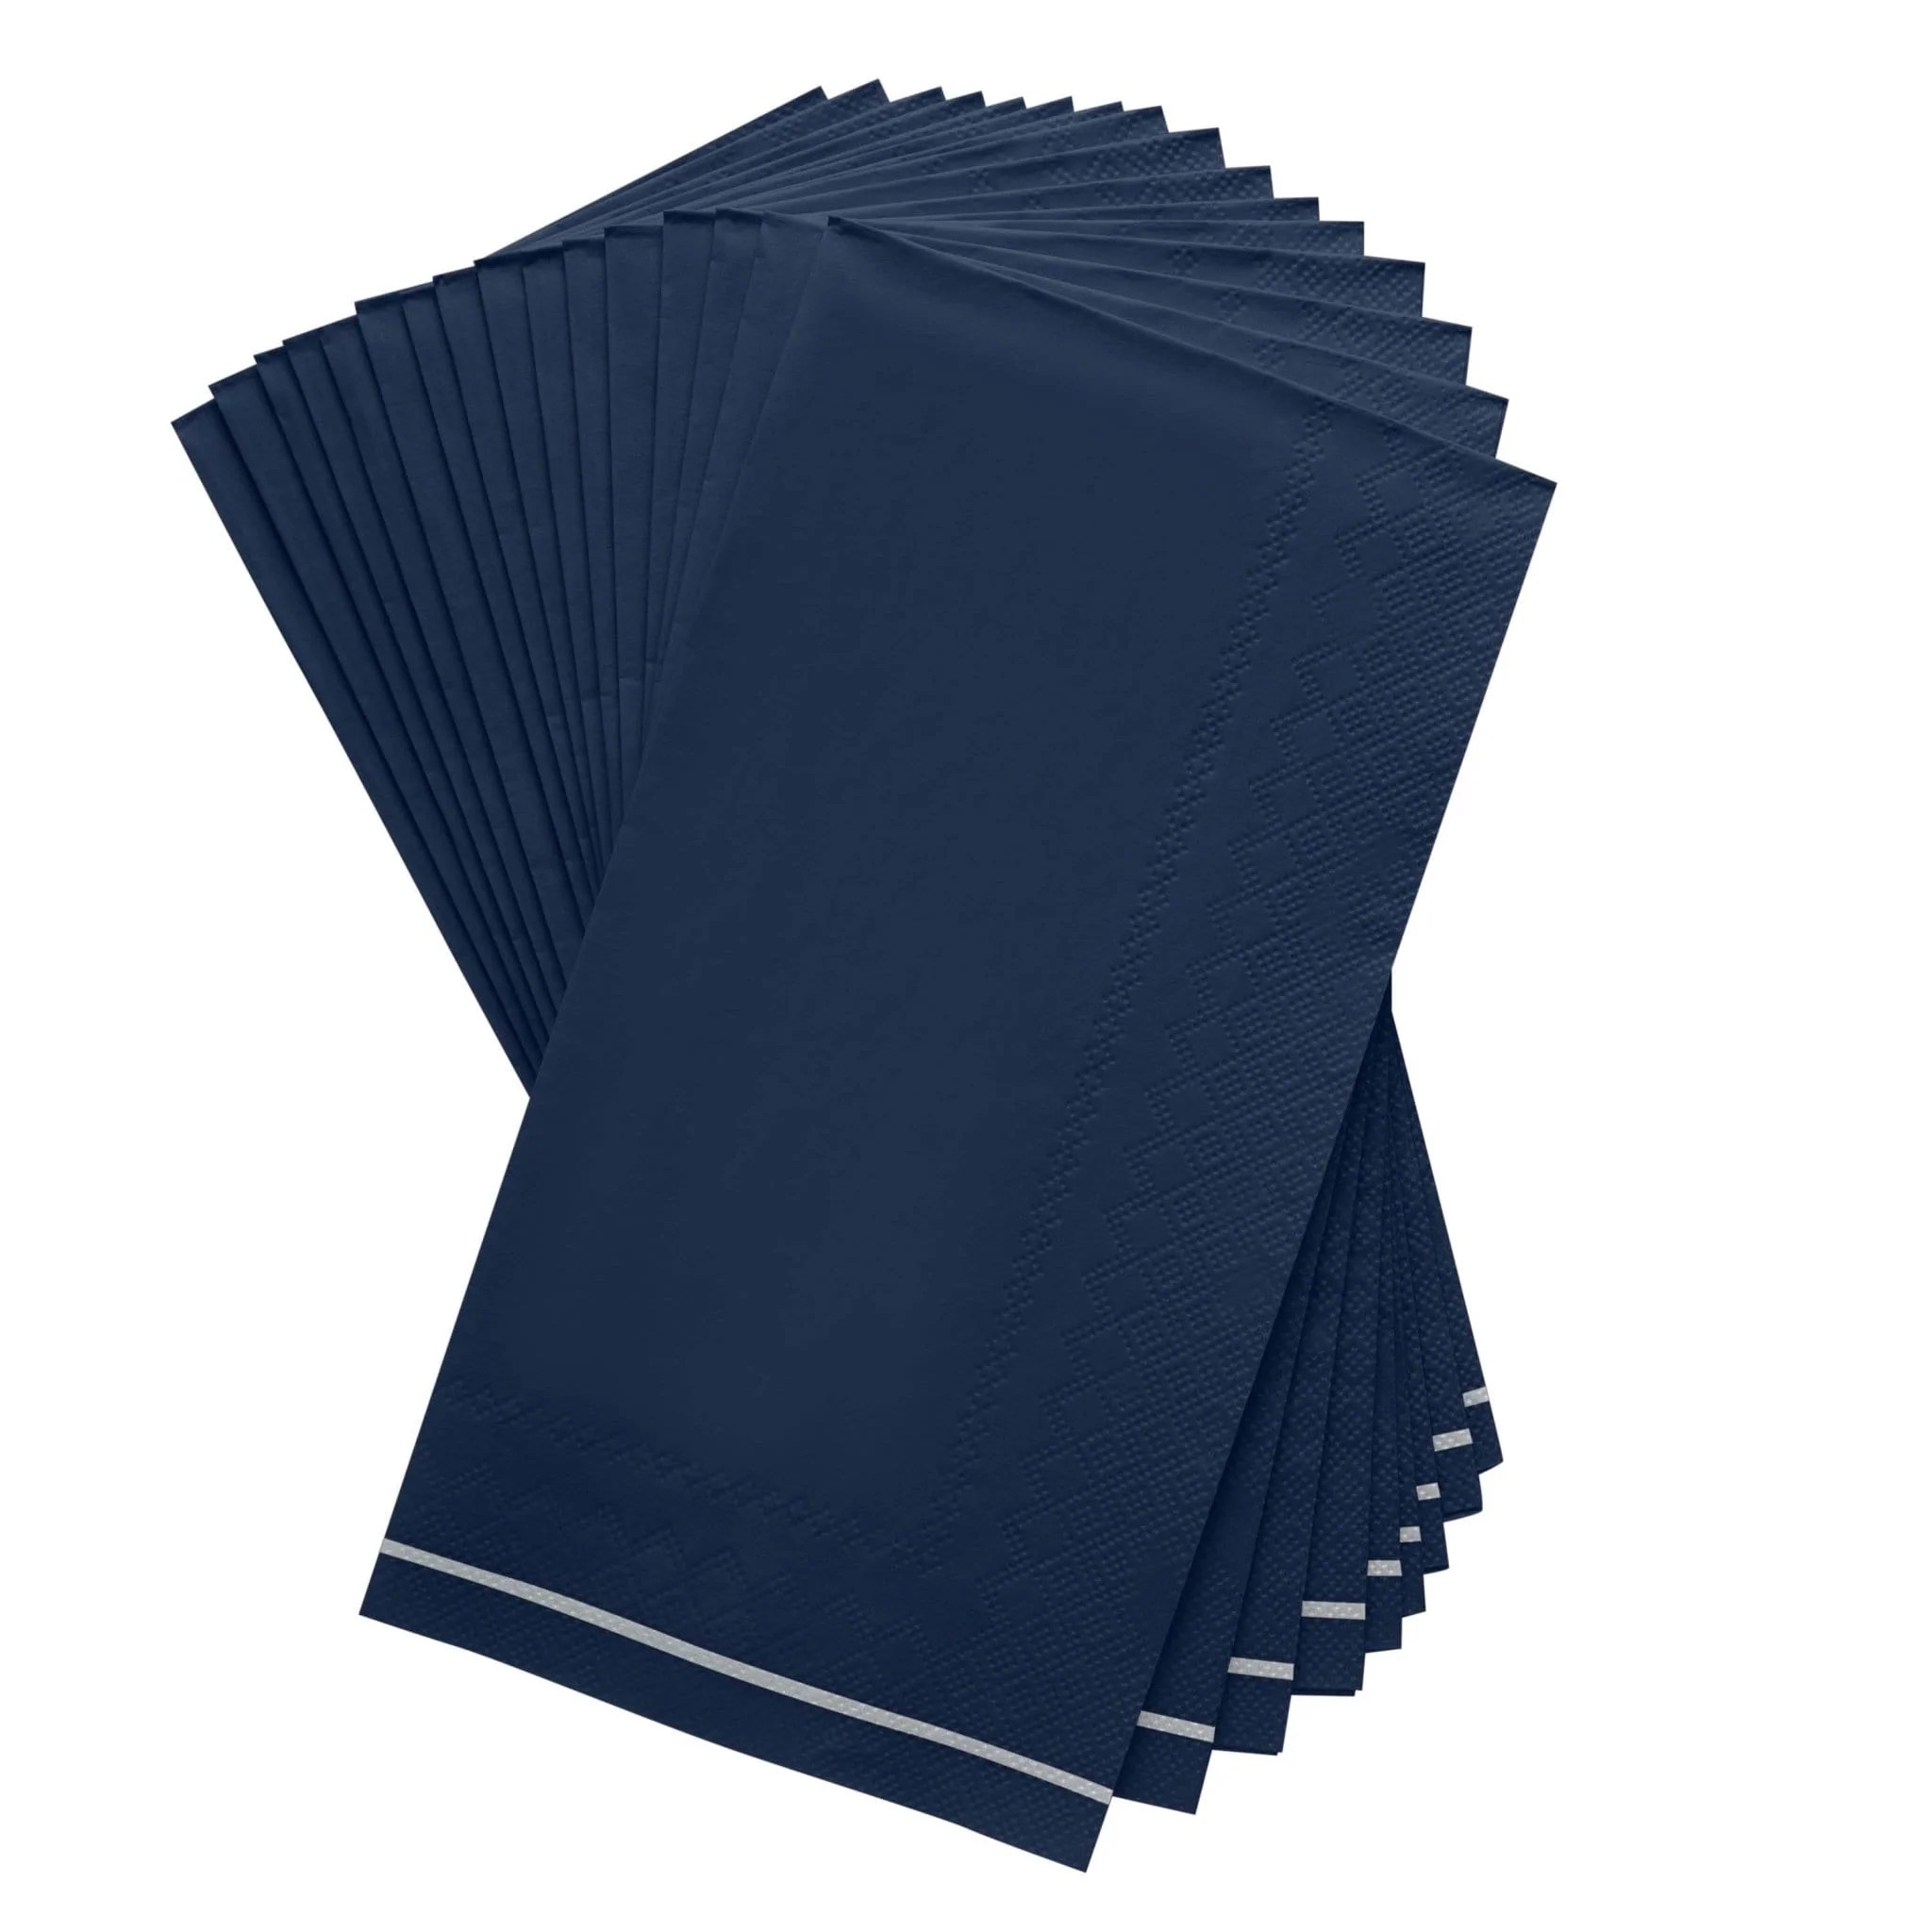 Luxe Party Navy with Silver Stripe Dinner Napkins - 16 pcs